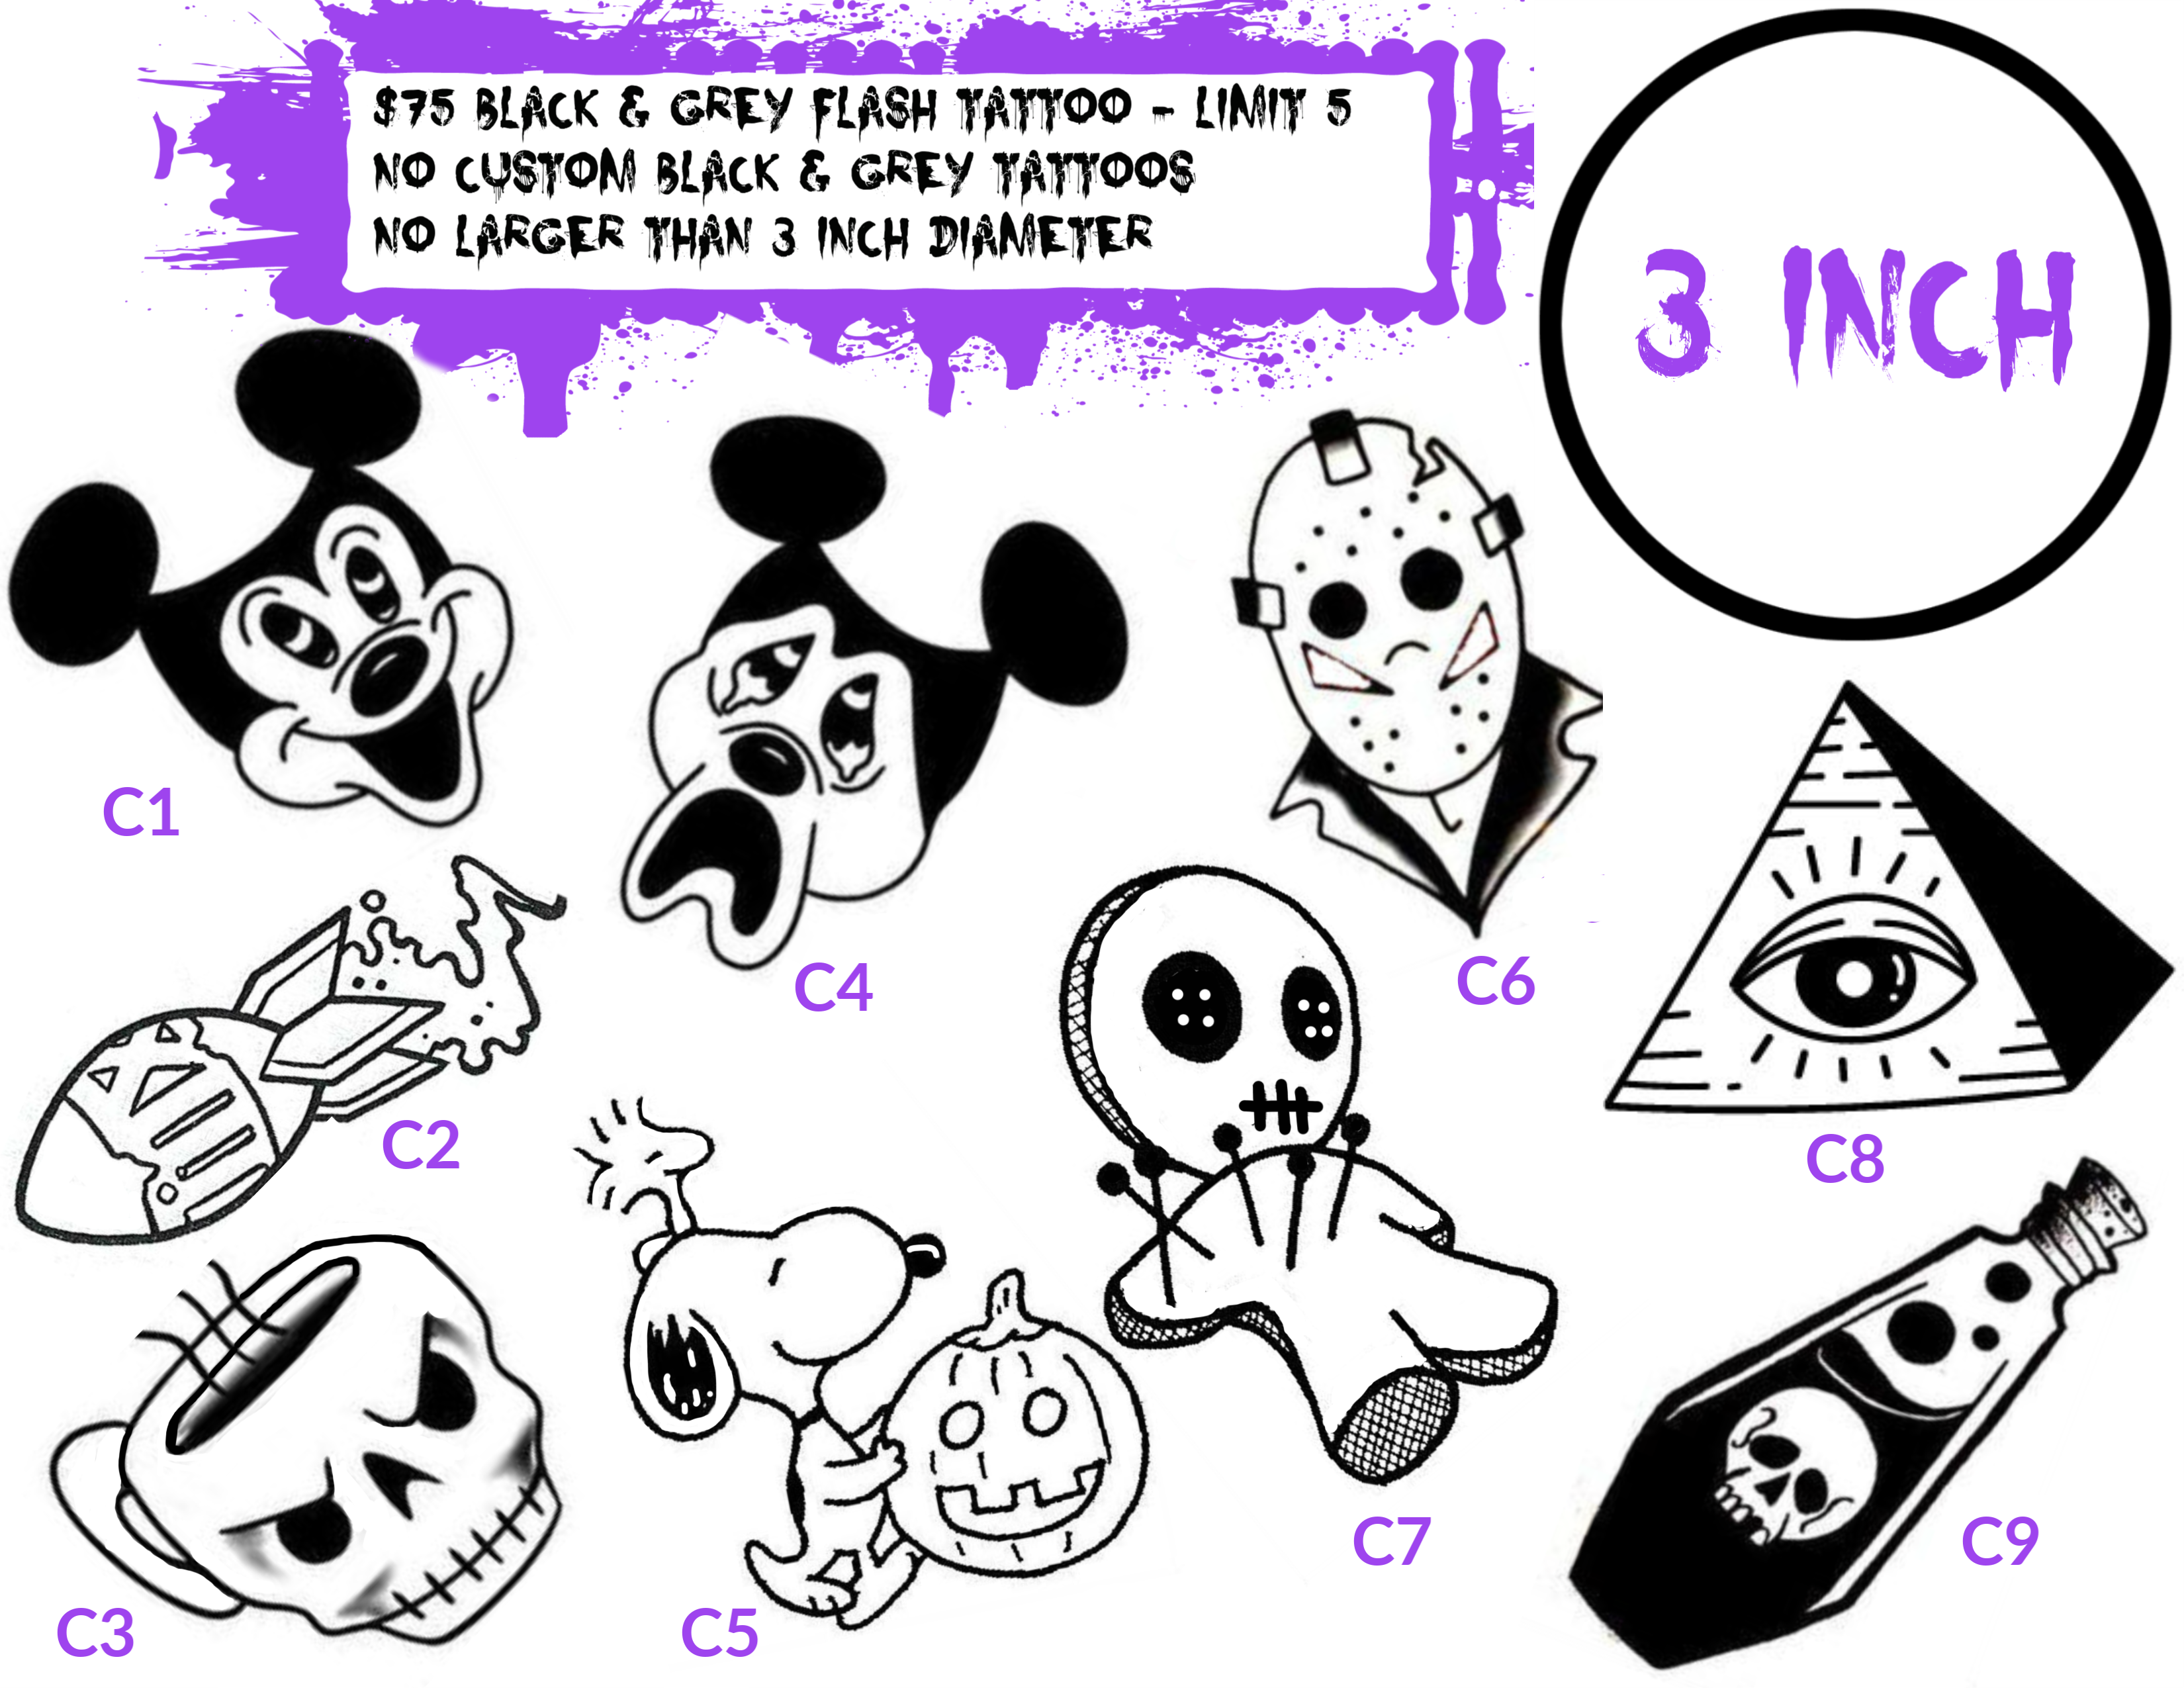 Friday The 13th Tattoo Specials